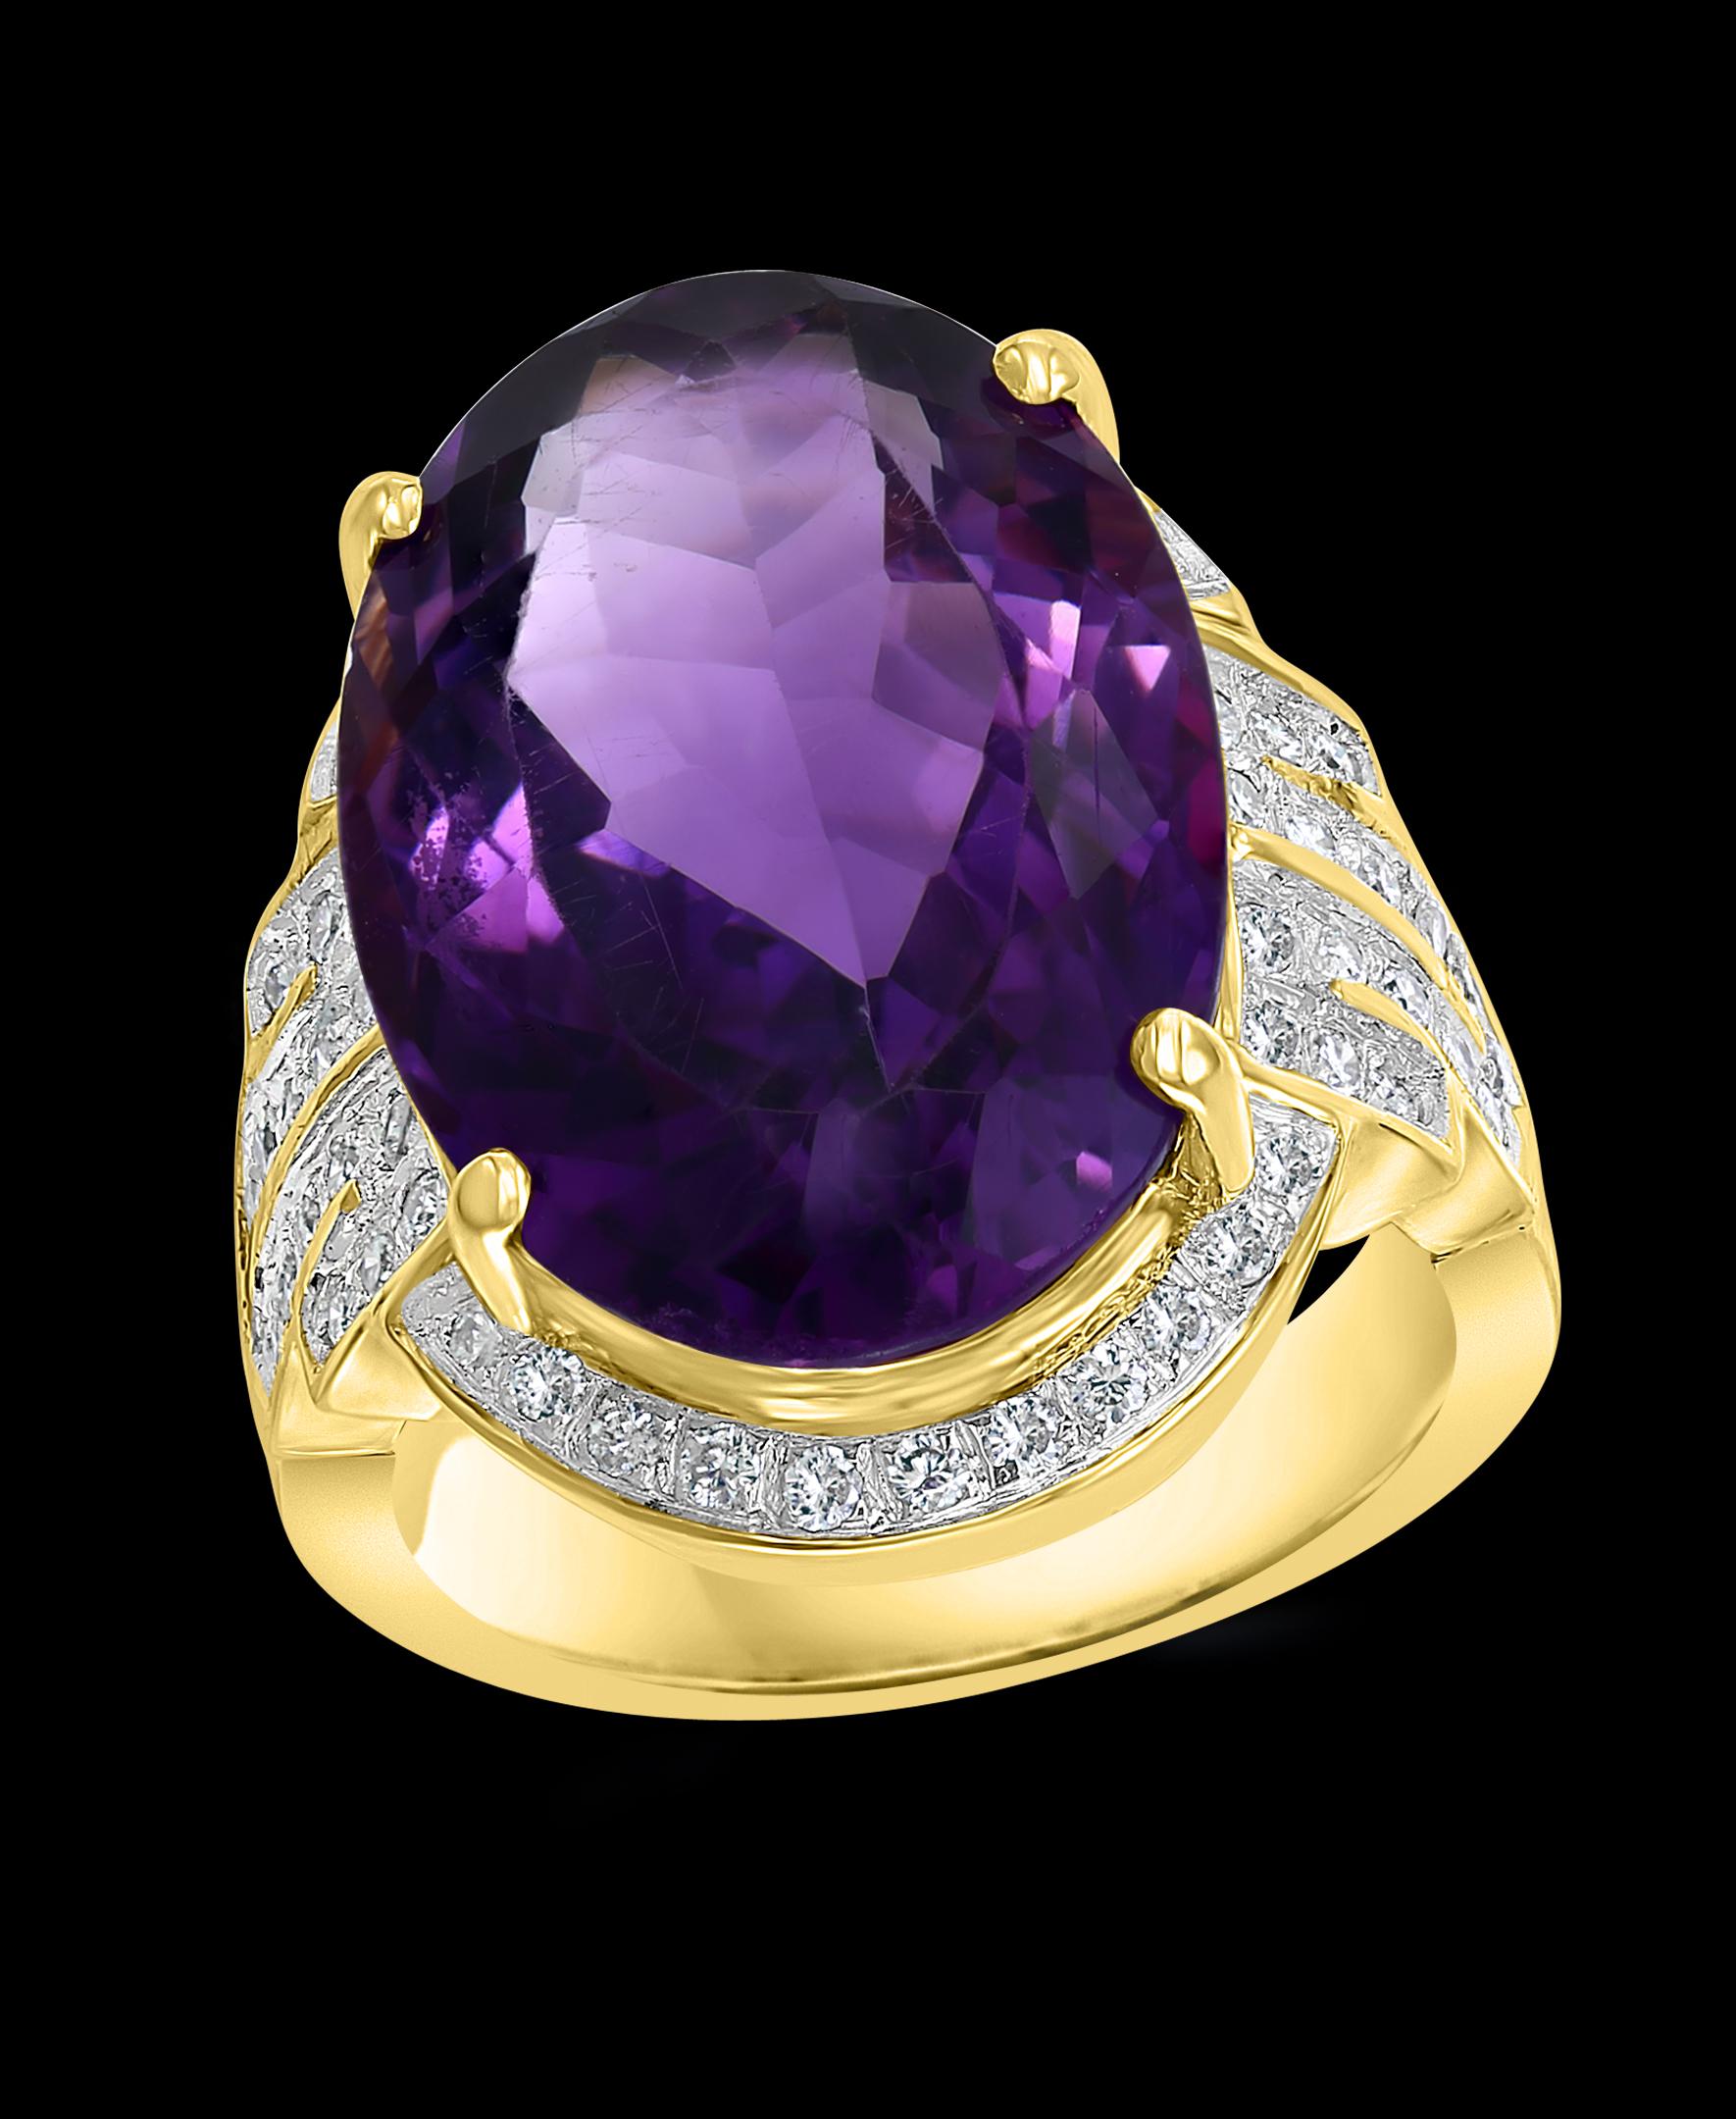 Approximately 20 Carat Amethyst and 1 Ct Diamond Cocktail /Engagement Ring in 14 karat Yellow gold

This is a Beautiful Cocktail ring ring which has a large approximately 20 carat of high quality Amethyst . Color and clarity is extremely nice. Large